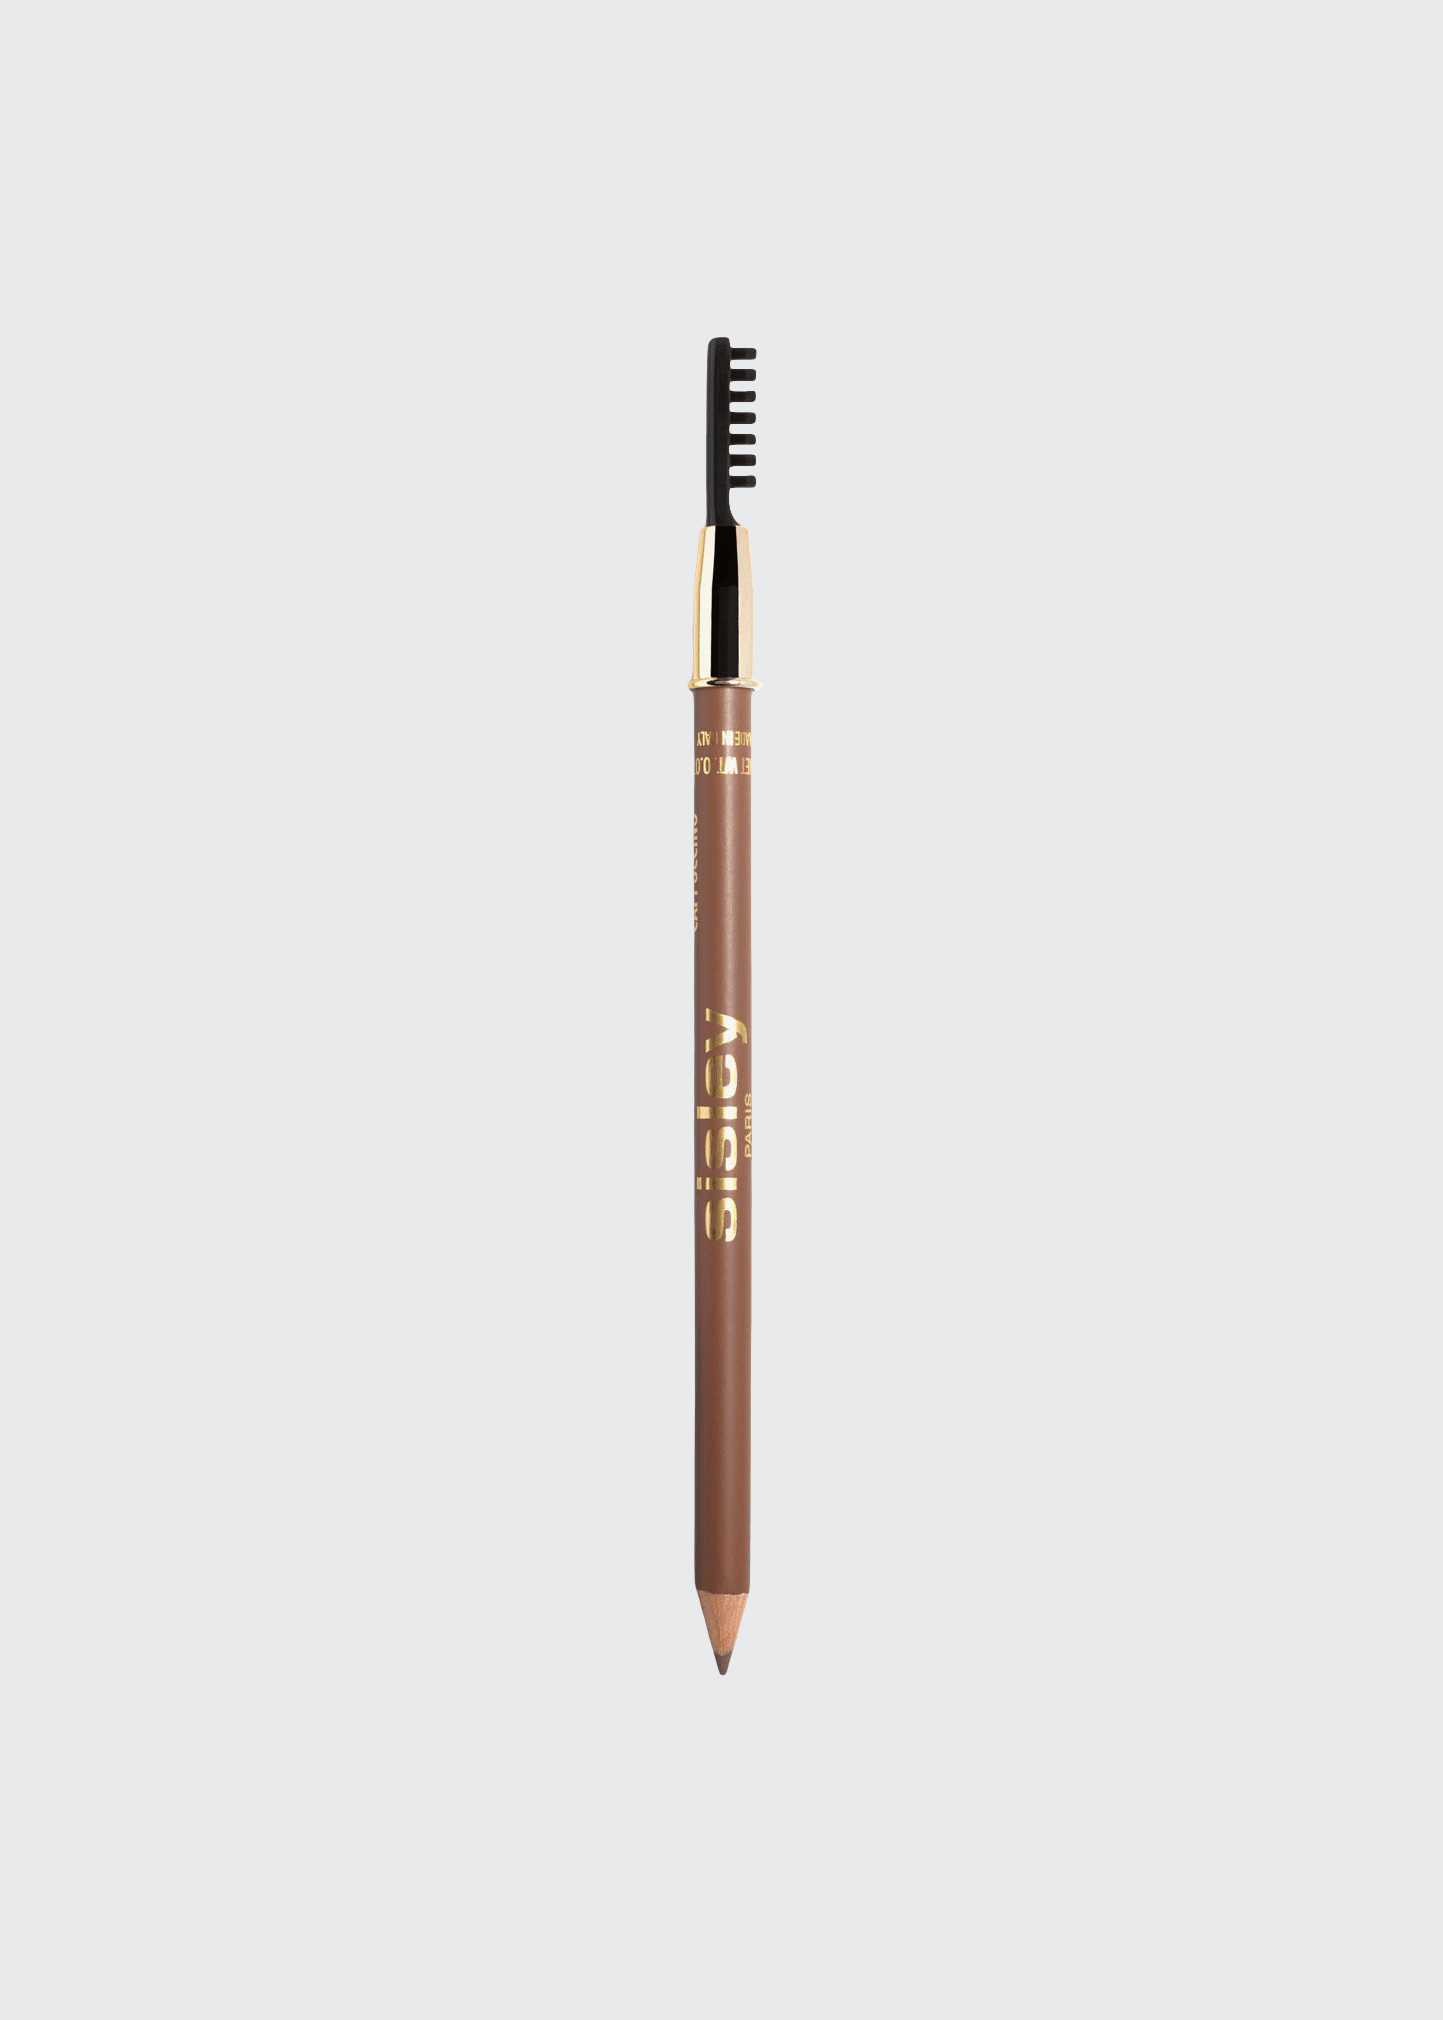 Sisley Paris Phyto-sourcils Perfect Eyebrow Pencil In 2 Chatain